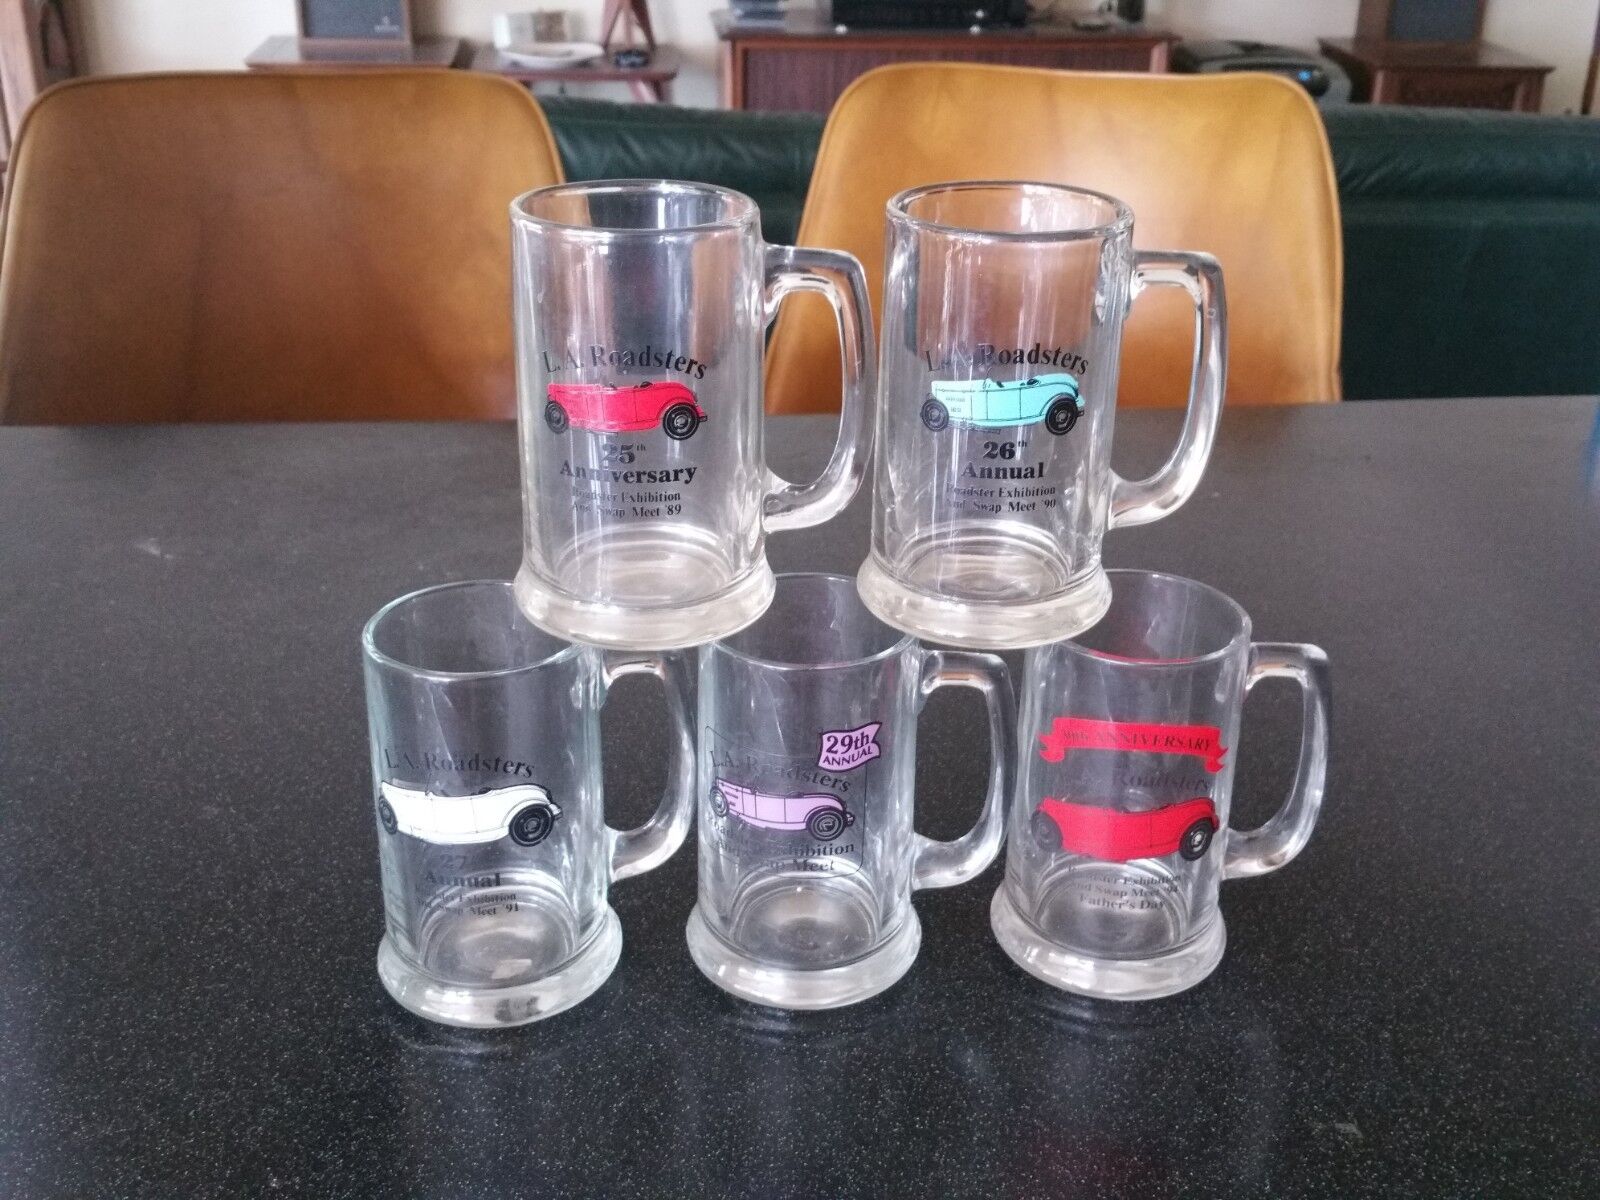 5 RARE  L.A. ROADSTERS ANNIVERSARY GLASSES BEER EXHIBITION & SWAP  1989-94